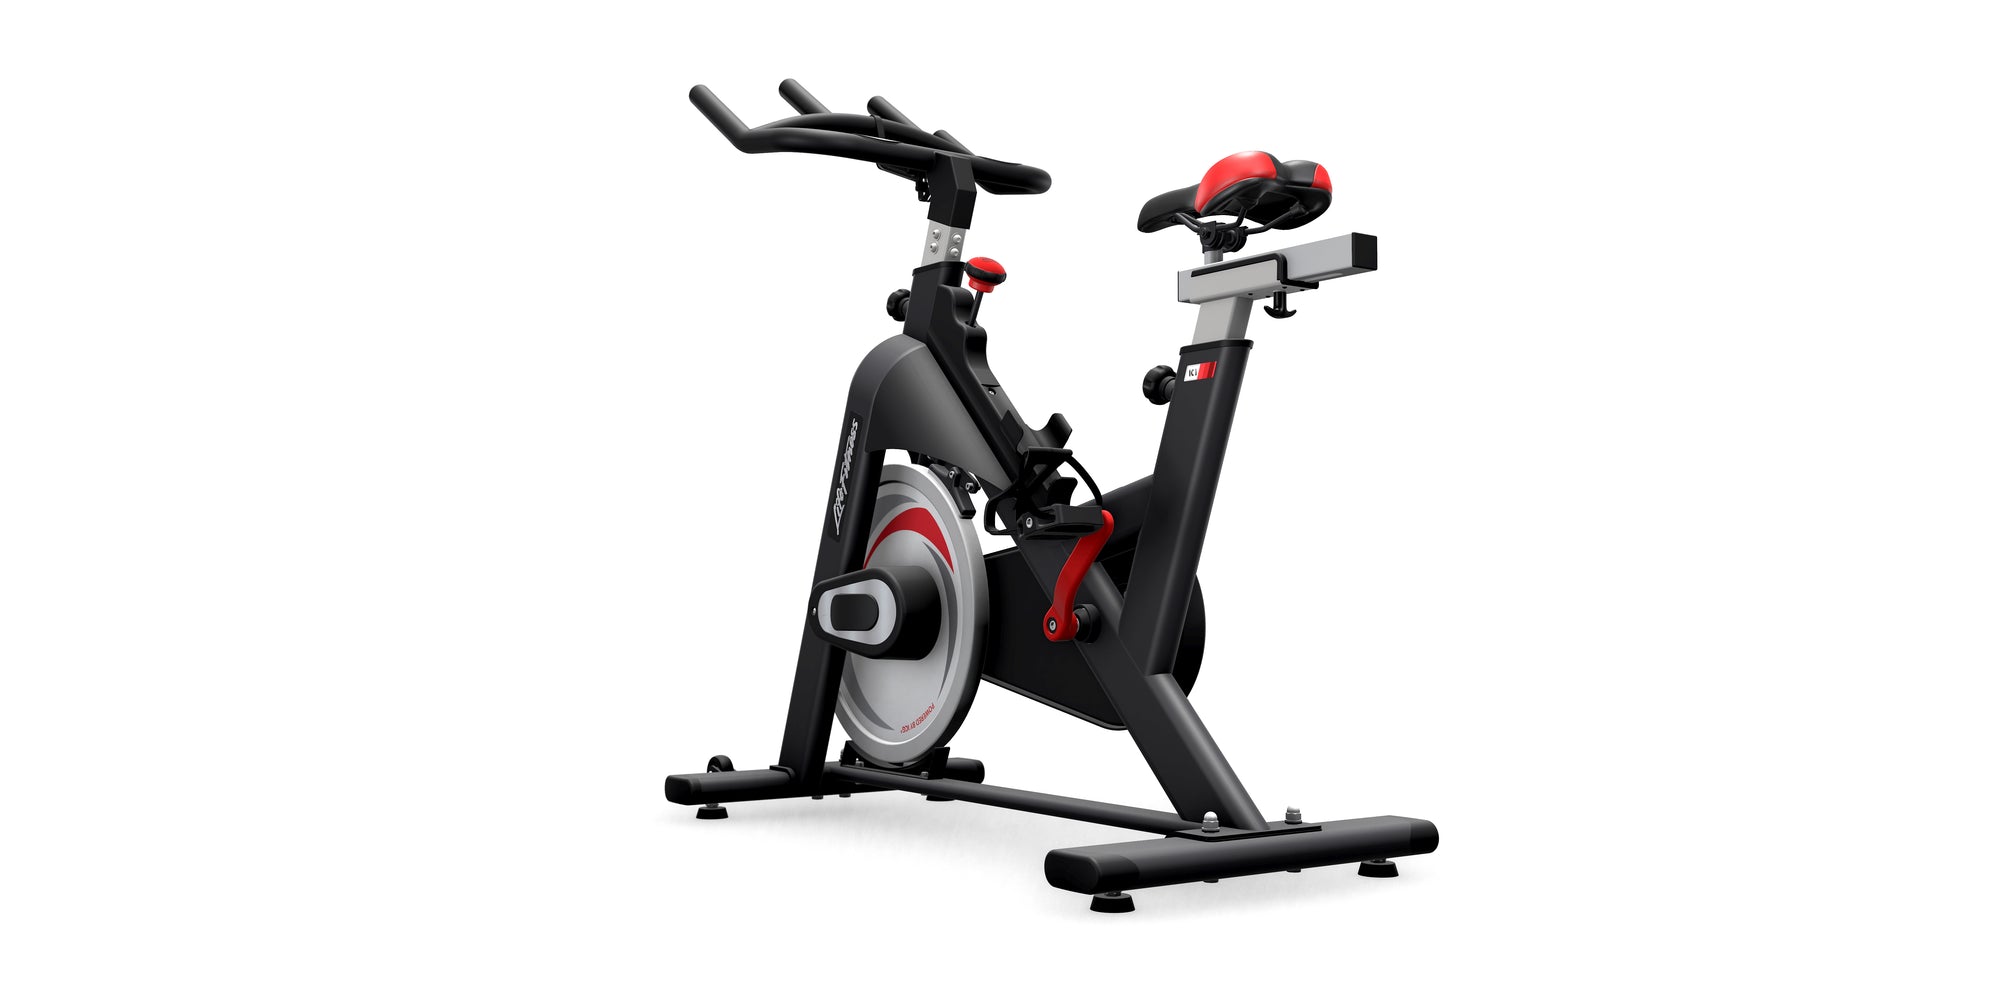 IC1 Indoor Cycle - $2205.49 + gst (Home use only)